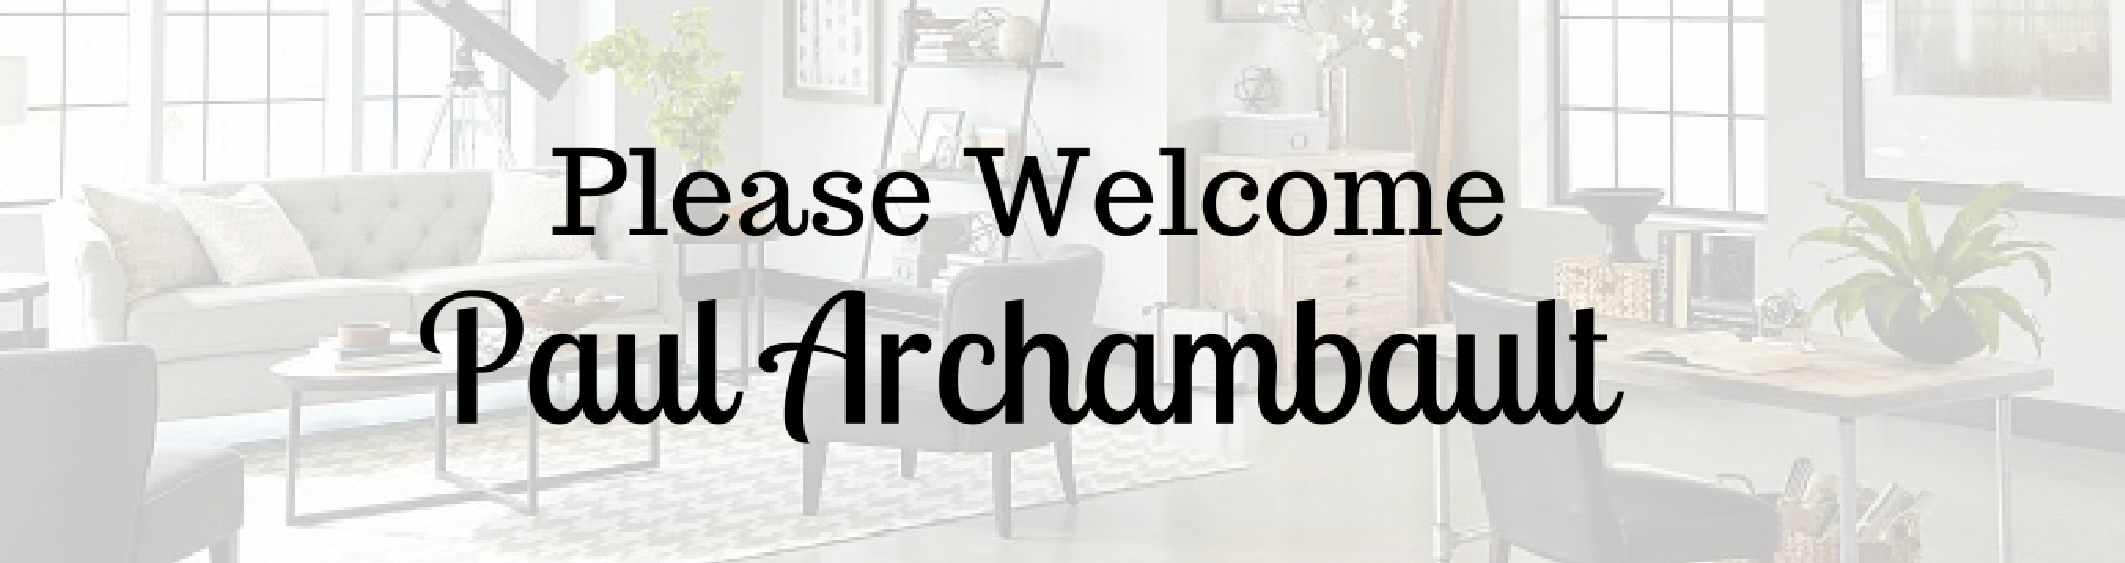 Please Welcome Paul Archambault to our Team!